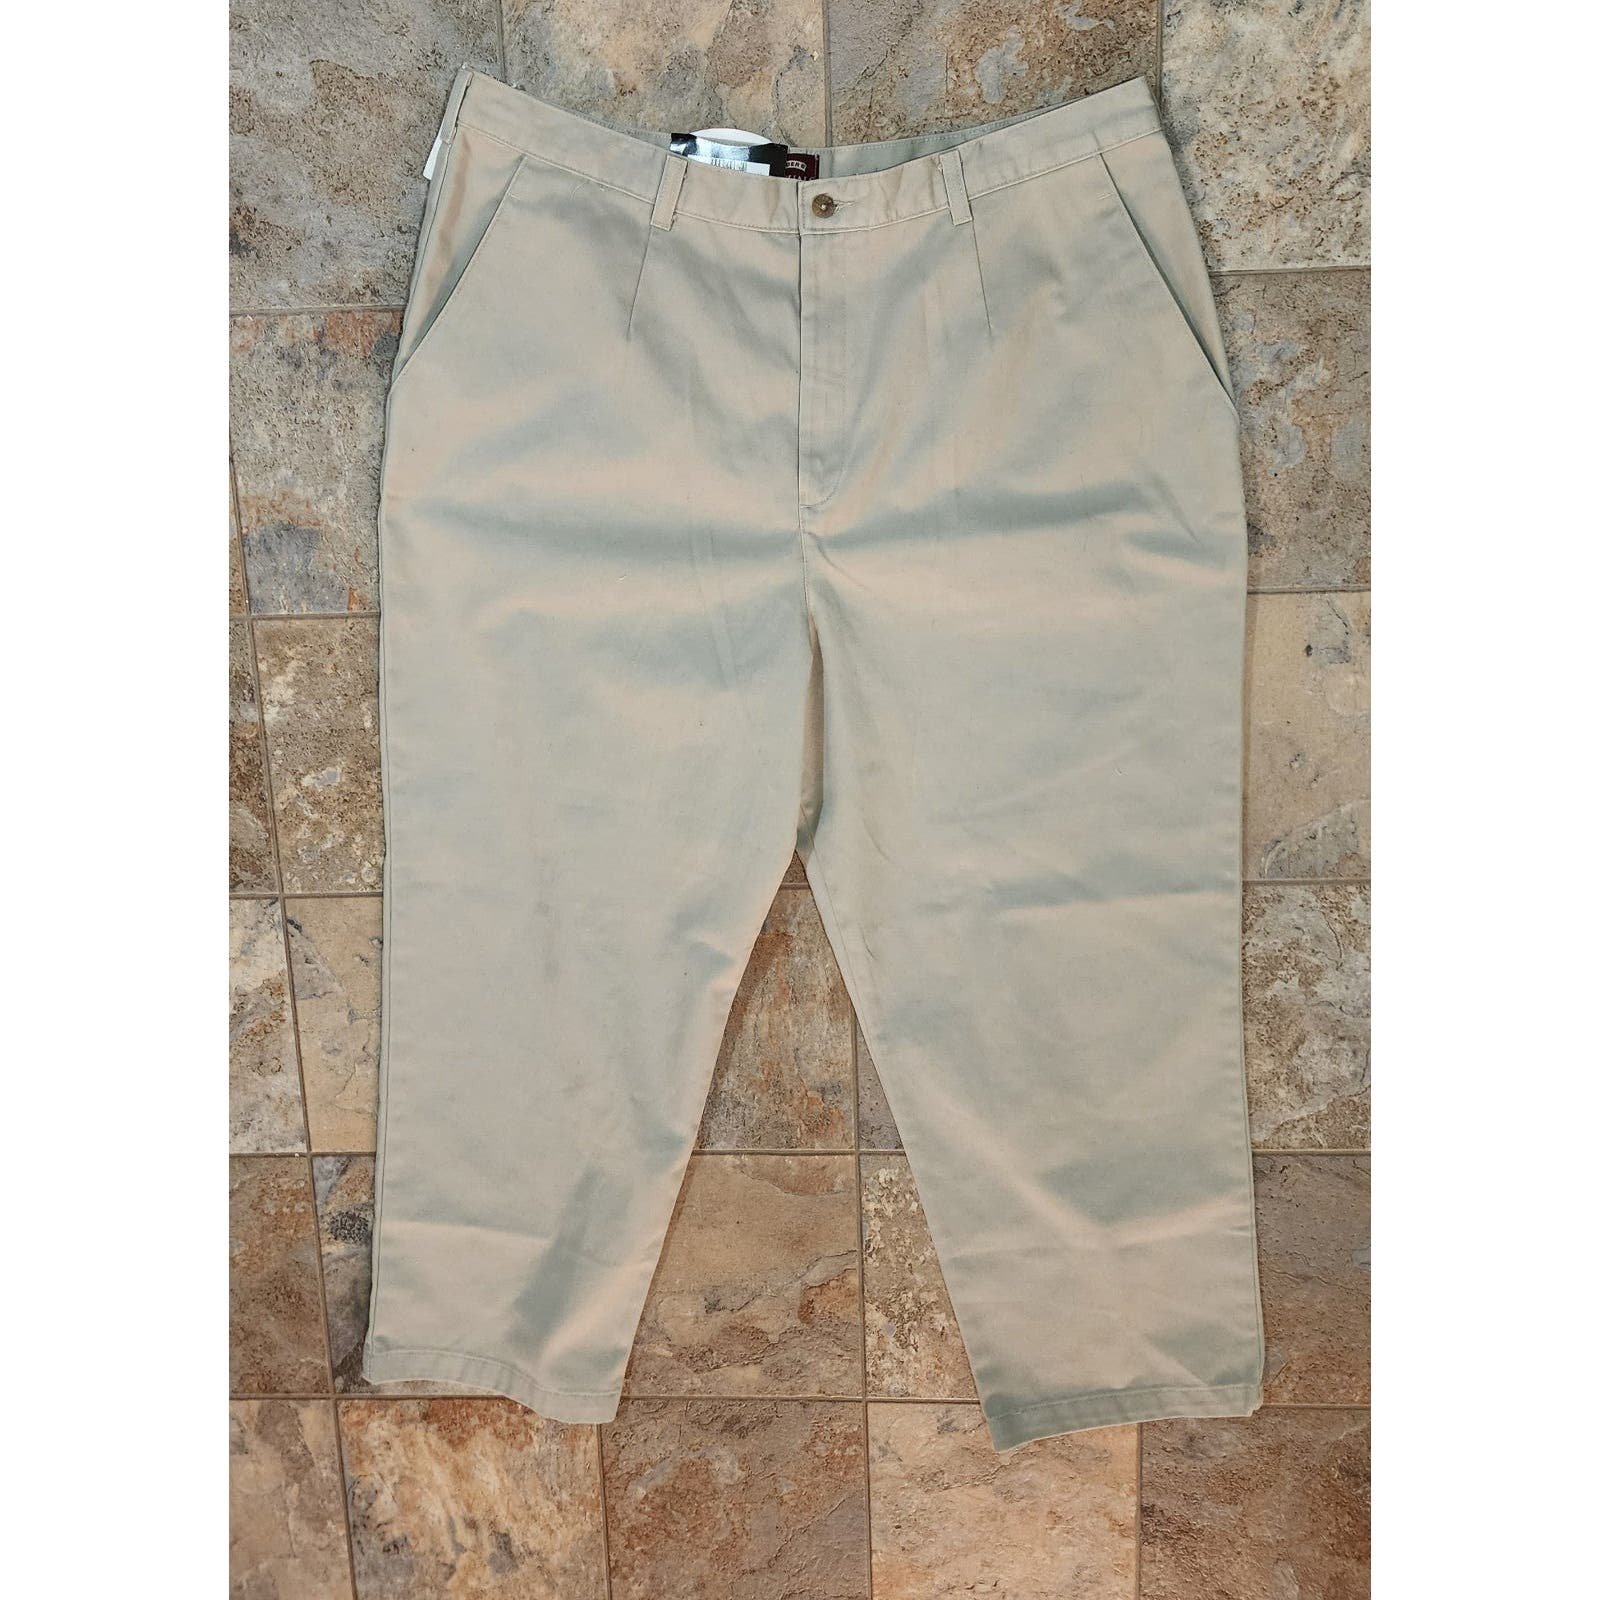 Fashion NWT Rider Relaxed Fit Twill Womens Trousers 2XL iBAeiZv6L Online Exclusive